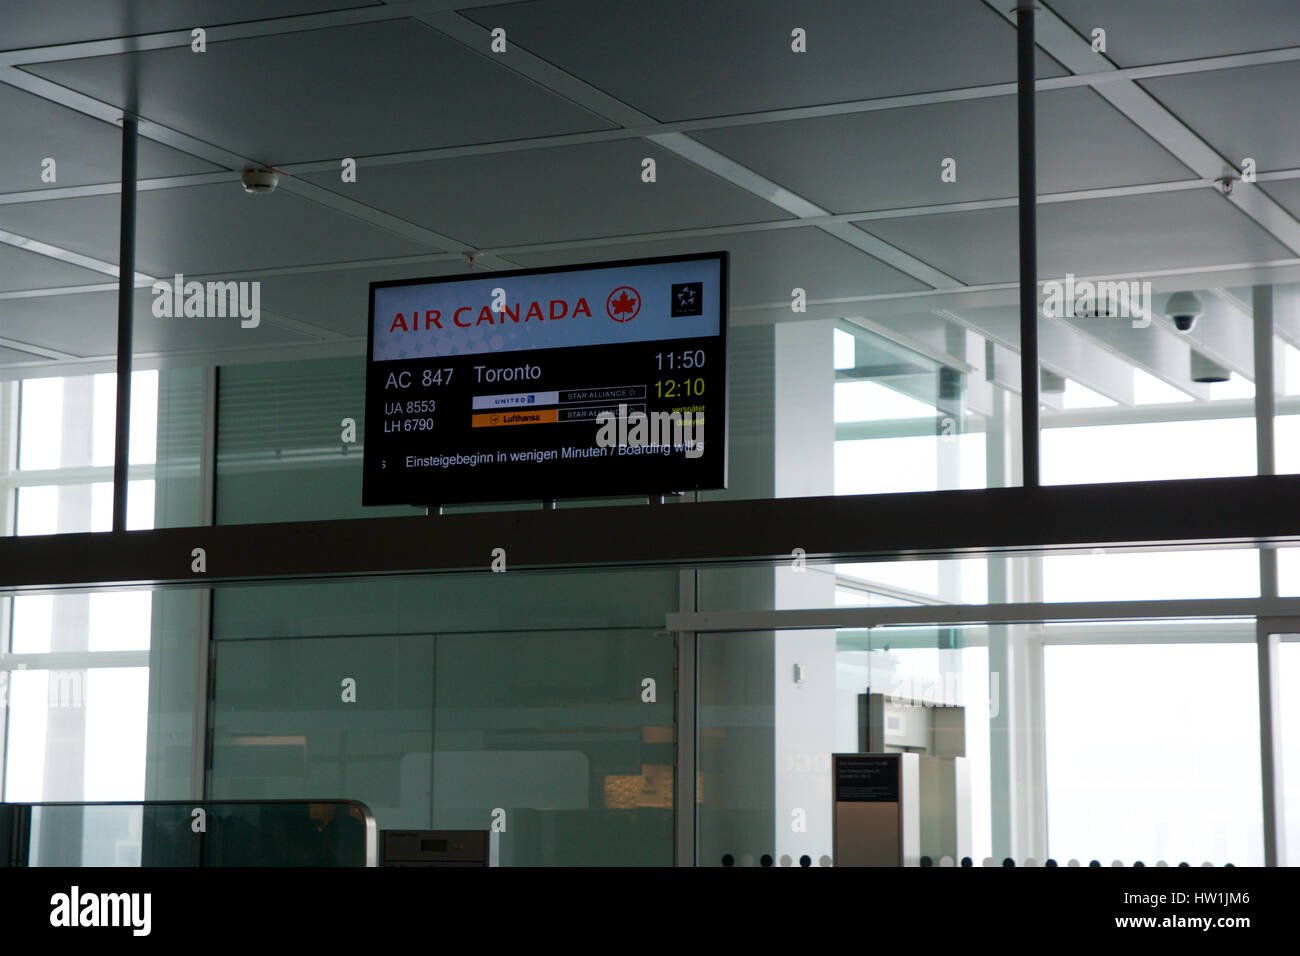 MUNICH, GERMANY - JAN 21st, 2017: Air Canada Boarding Gate at MUC airport for my Business Class flight to Toronto, depature screen. Stock Photo